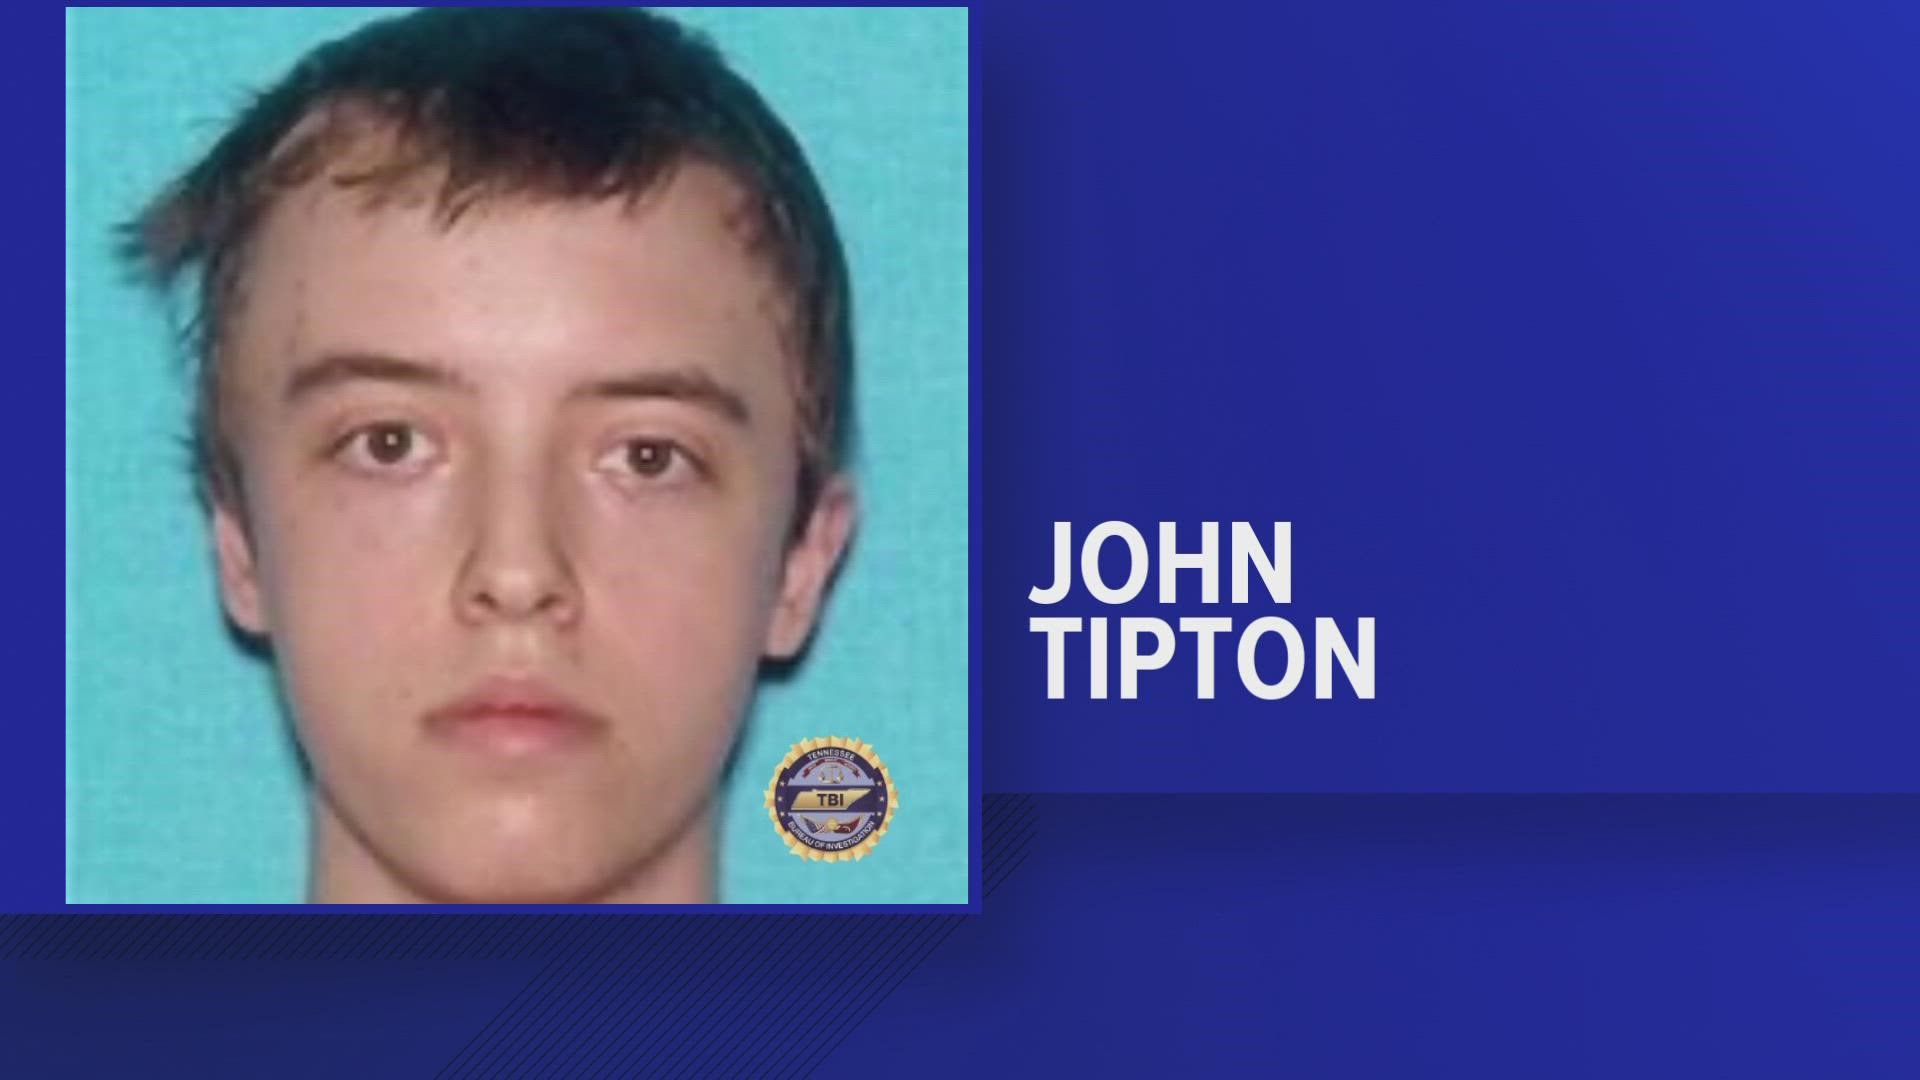 The Tennessee Bureau of Investigation said on March 6 that a 19-year-old man missing from Sevierville was found dead in Knoxville.